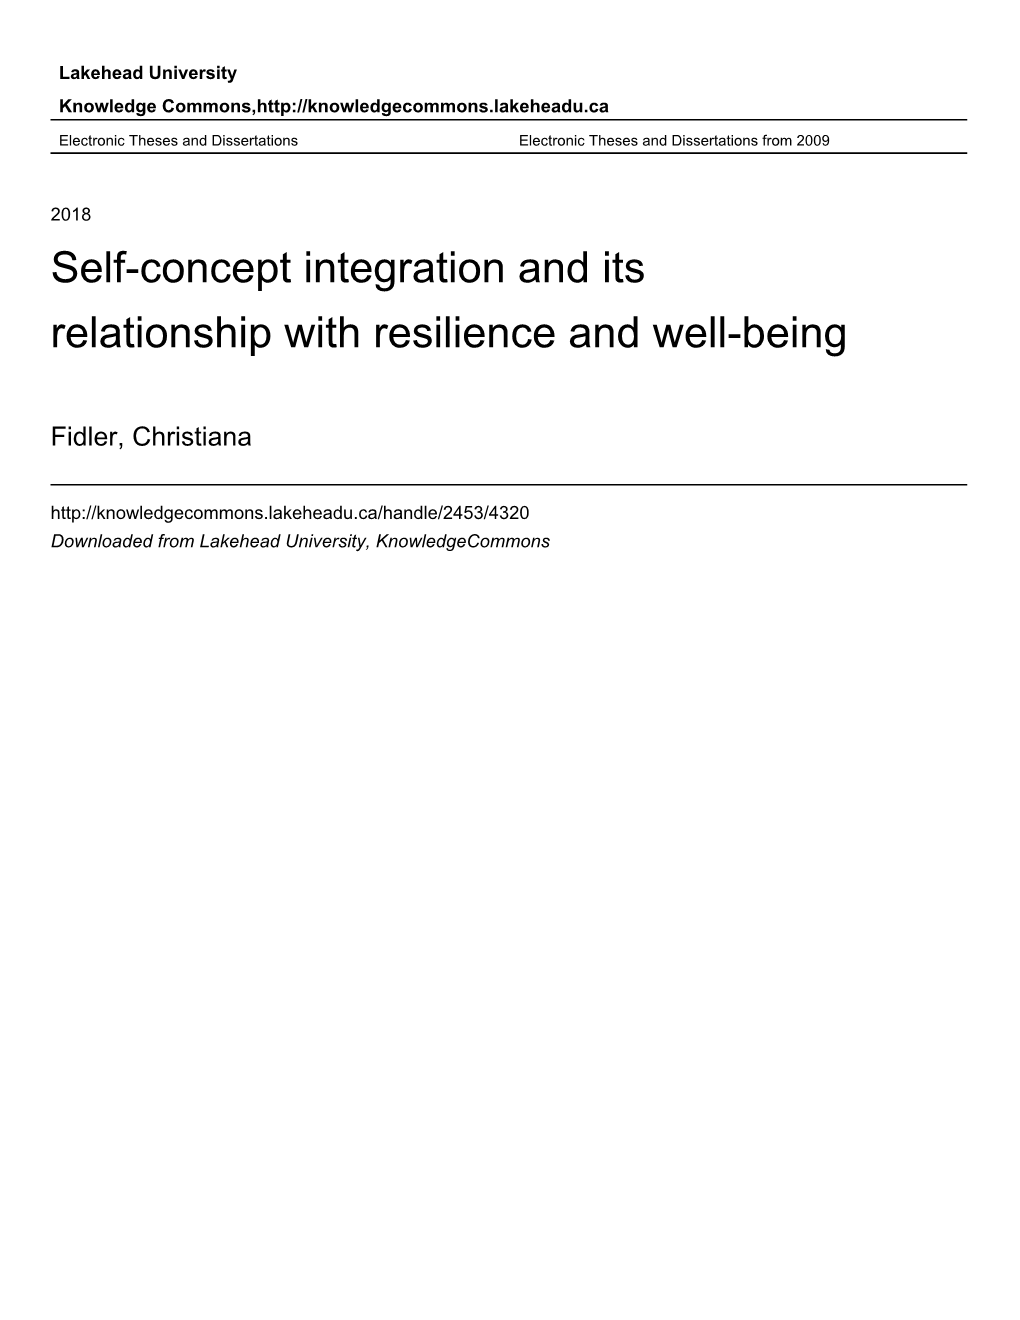 Self-Concept Integration and Its Relationship with Resilience and Well-Being